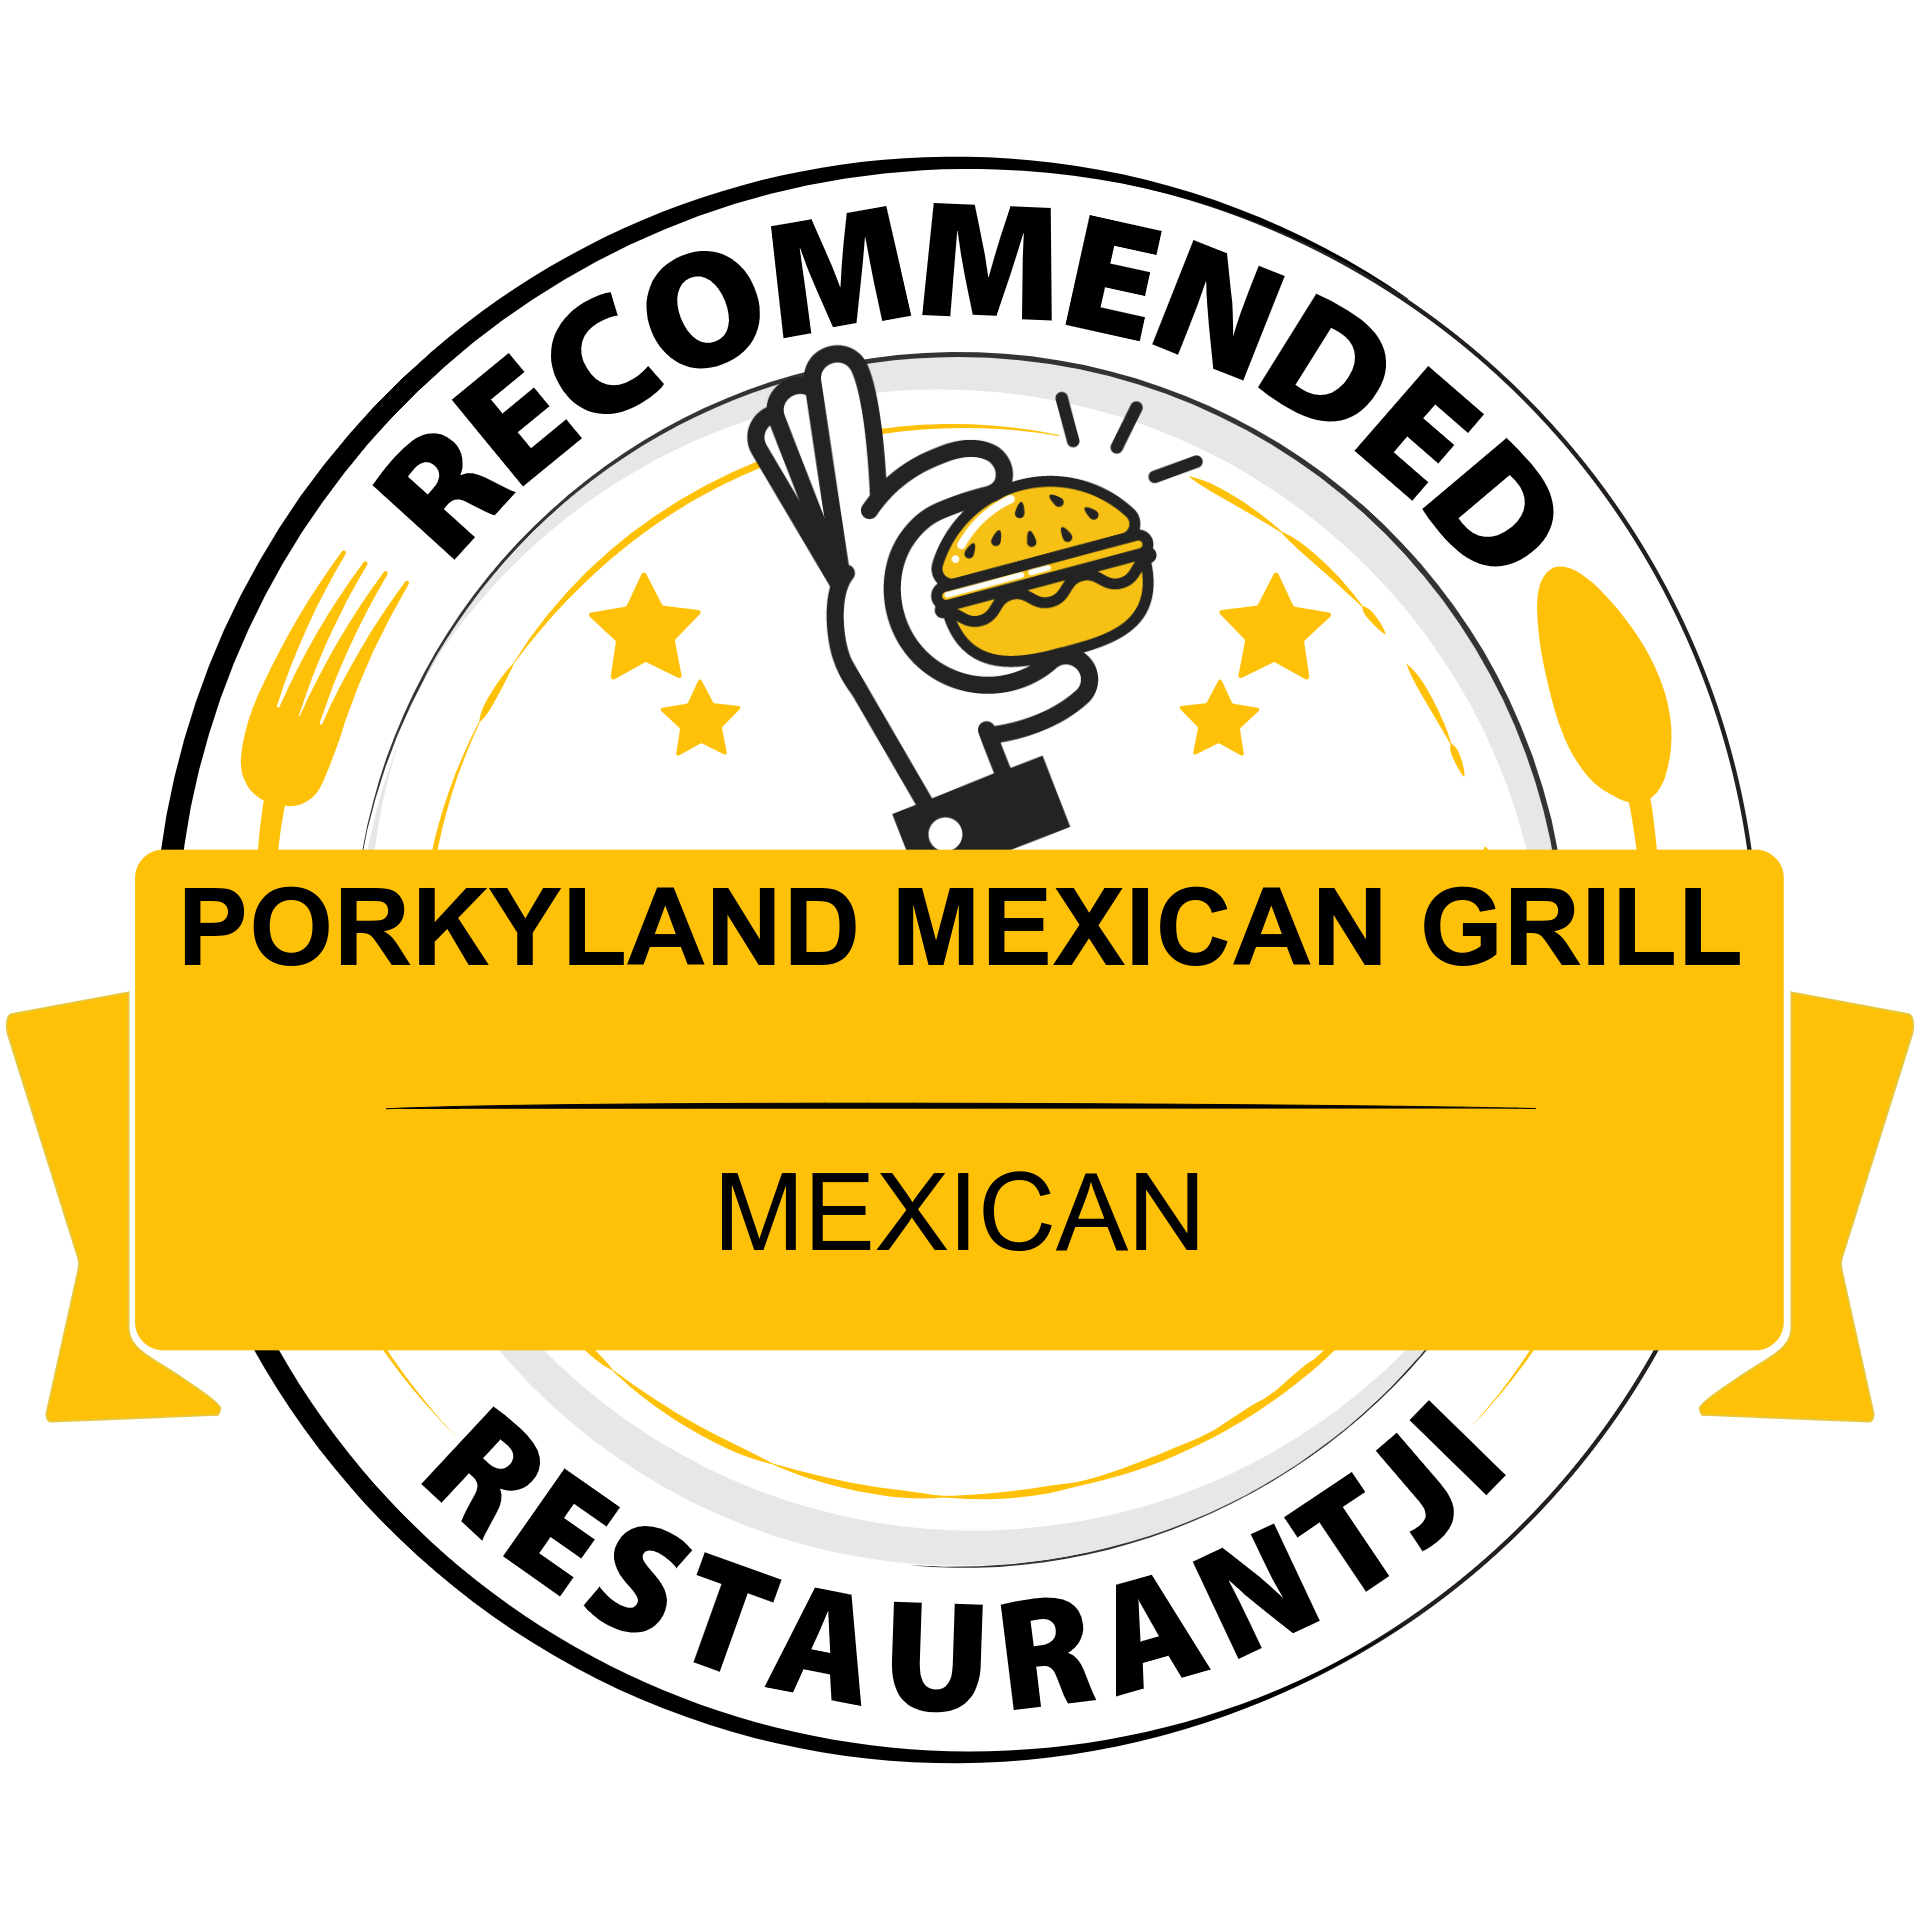 Porkyland Mexican Grill is a standout choice on Restaurantji - a convenient, all-in-one local dining guide with reviews, menus and photos.